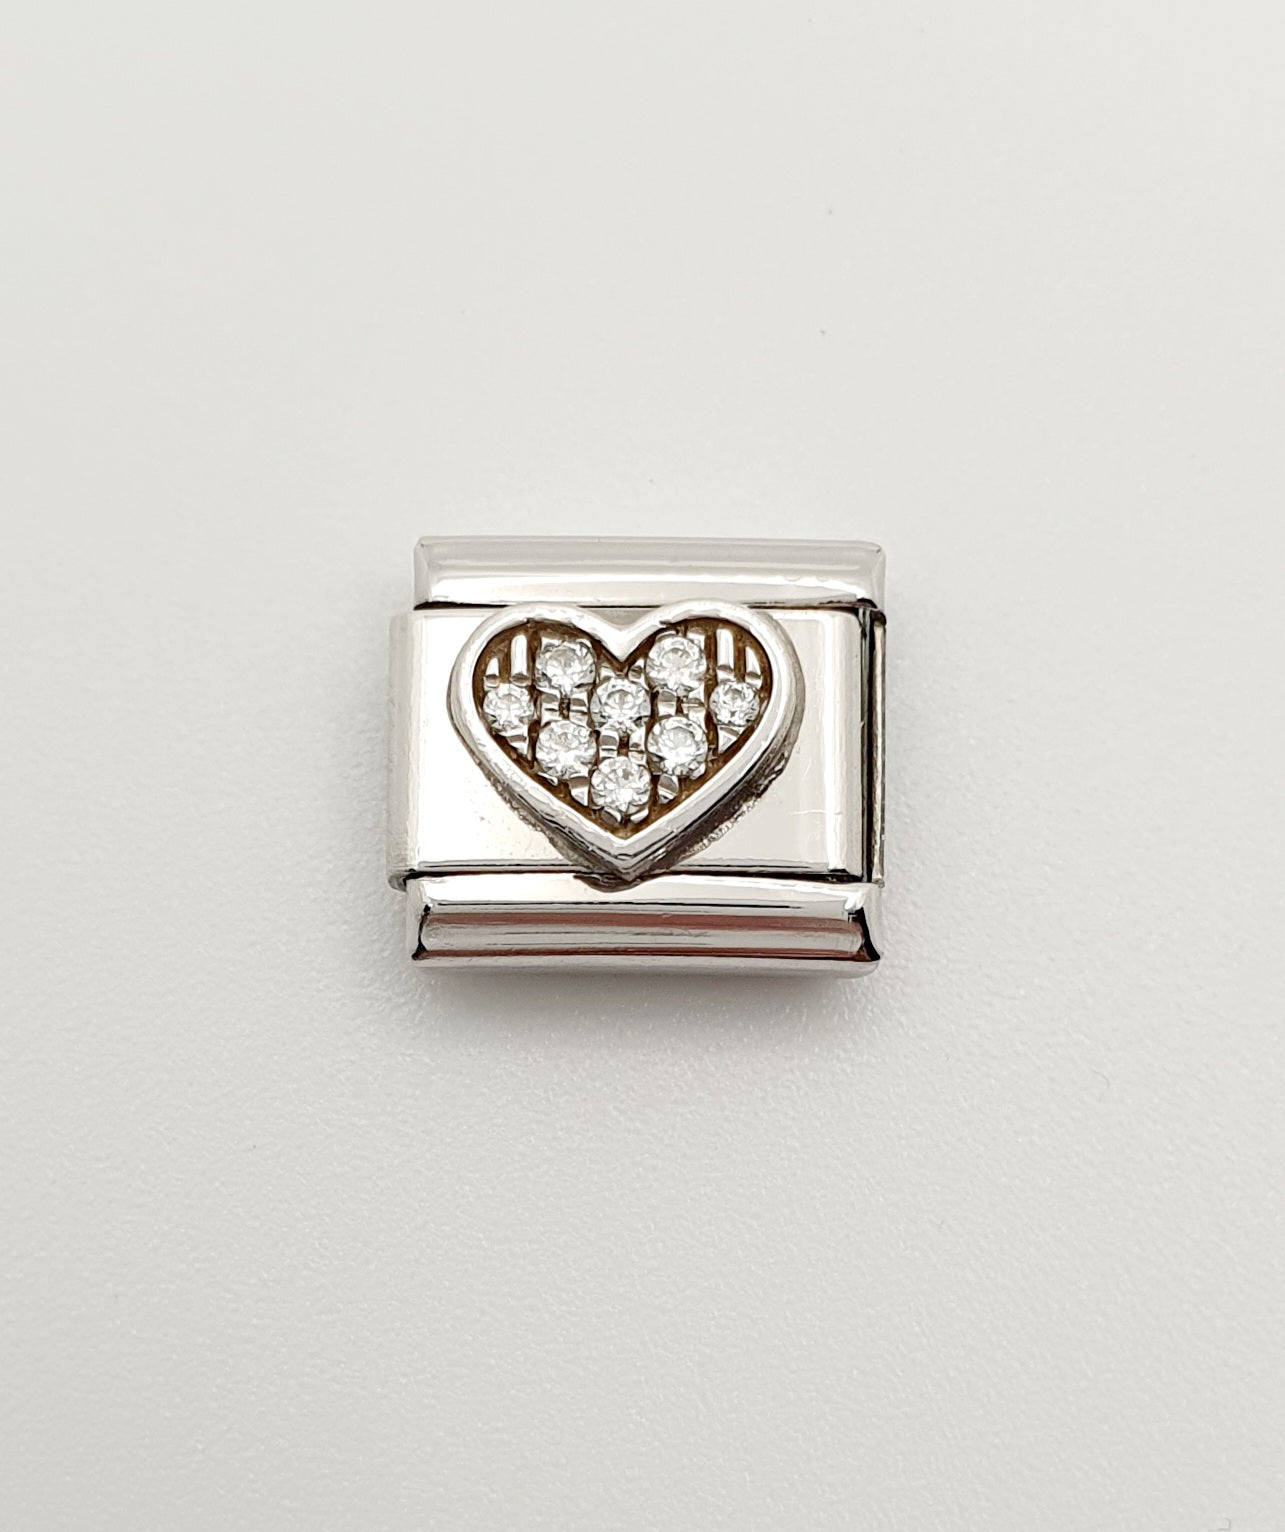 Nomination Charm Link "Heart" Stainless Steel with CZ's & 925 Silver, 330304 01